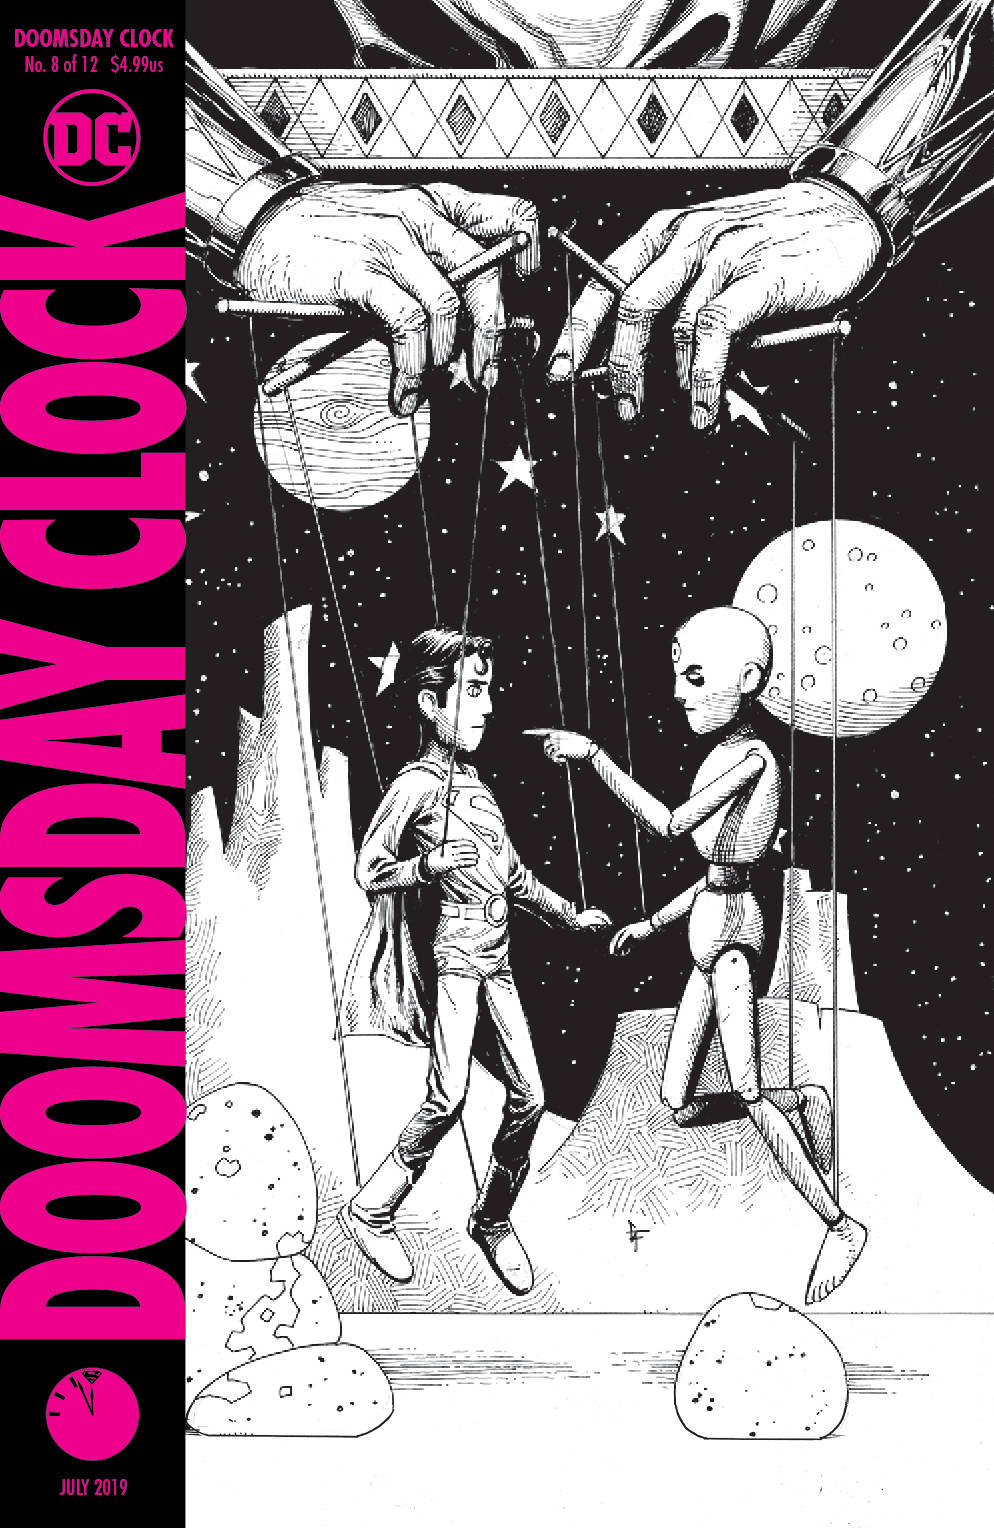 Doomsday Clock #8 (Of 12) 2nd Printing